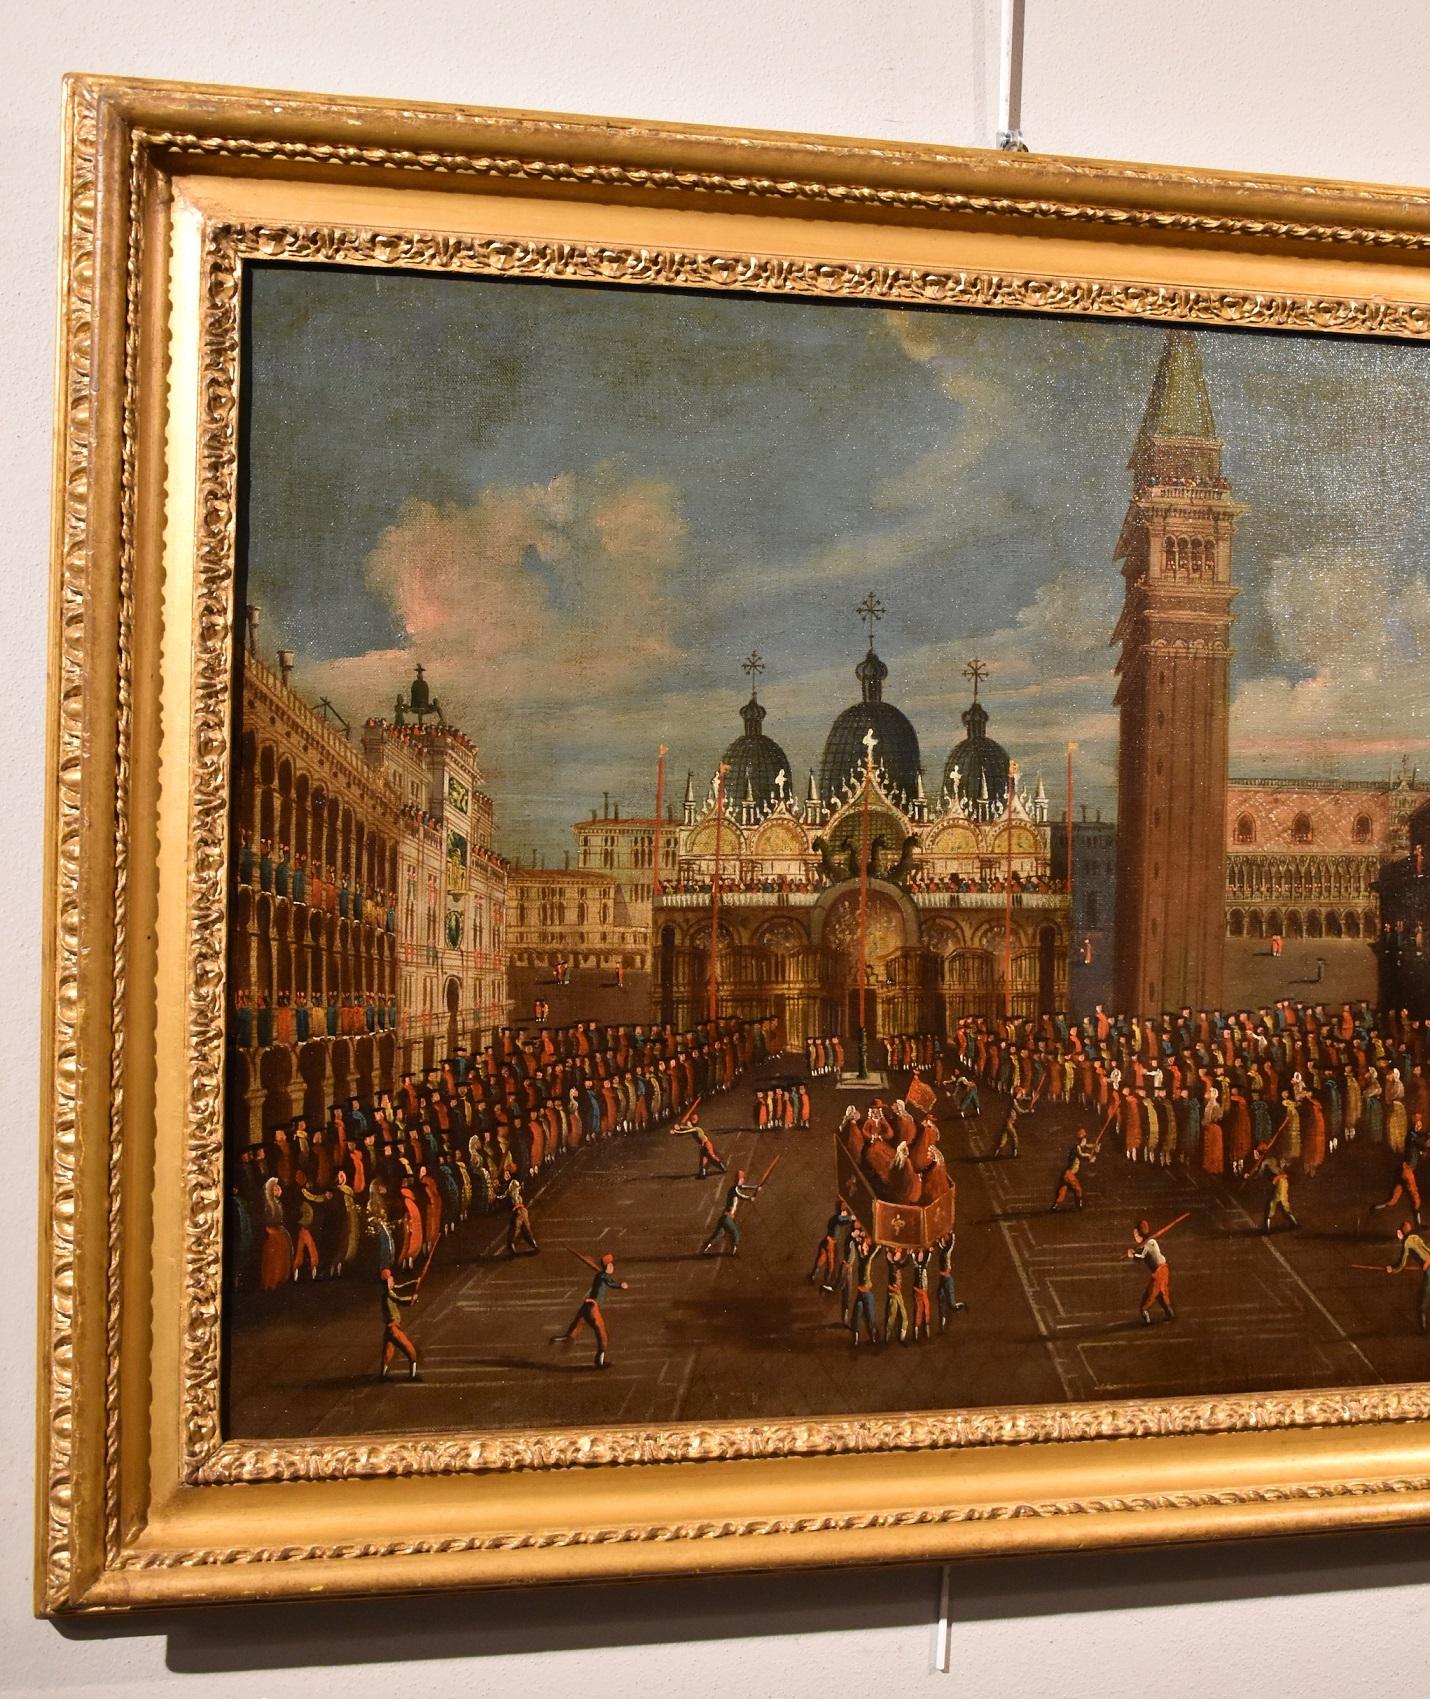 Venetian landscape painter XVIII-XIX century - Follower of Gabriele Bella (Venice 1730 - Venice 1799)
Venice with Piazza San Marco with the celebrations for the coronation of the Doge

oil on canvas, 67 x 94 cm.
with frame 84 x 110 cm.

Our